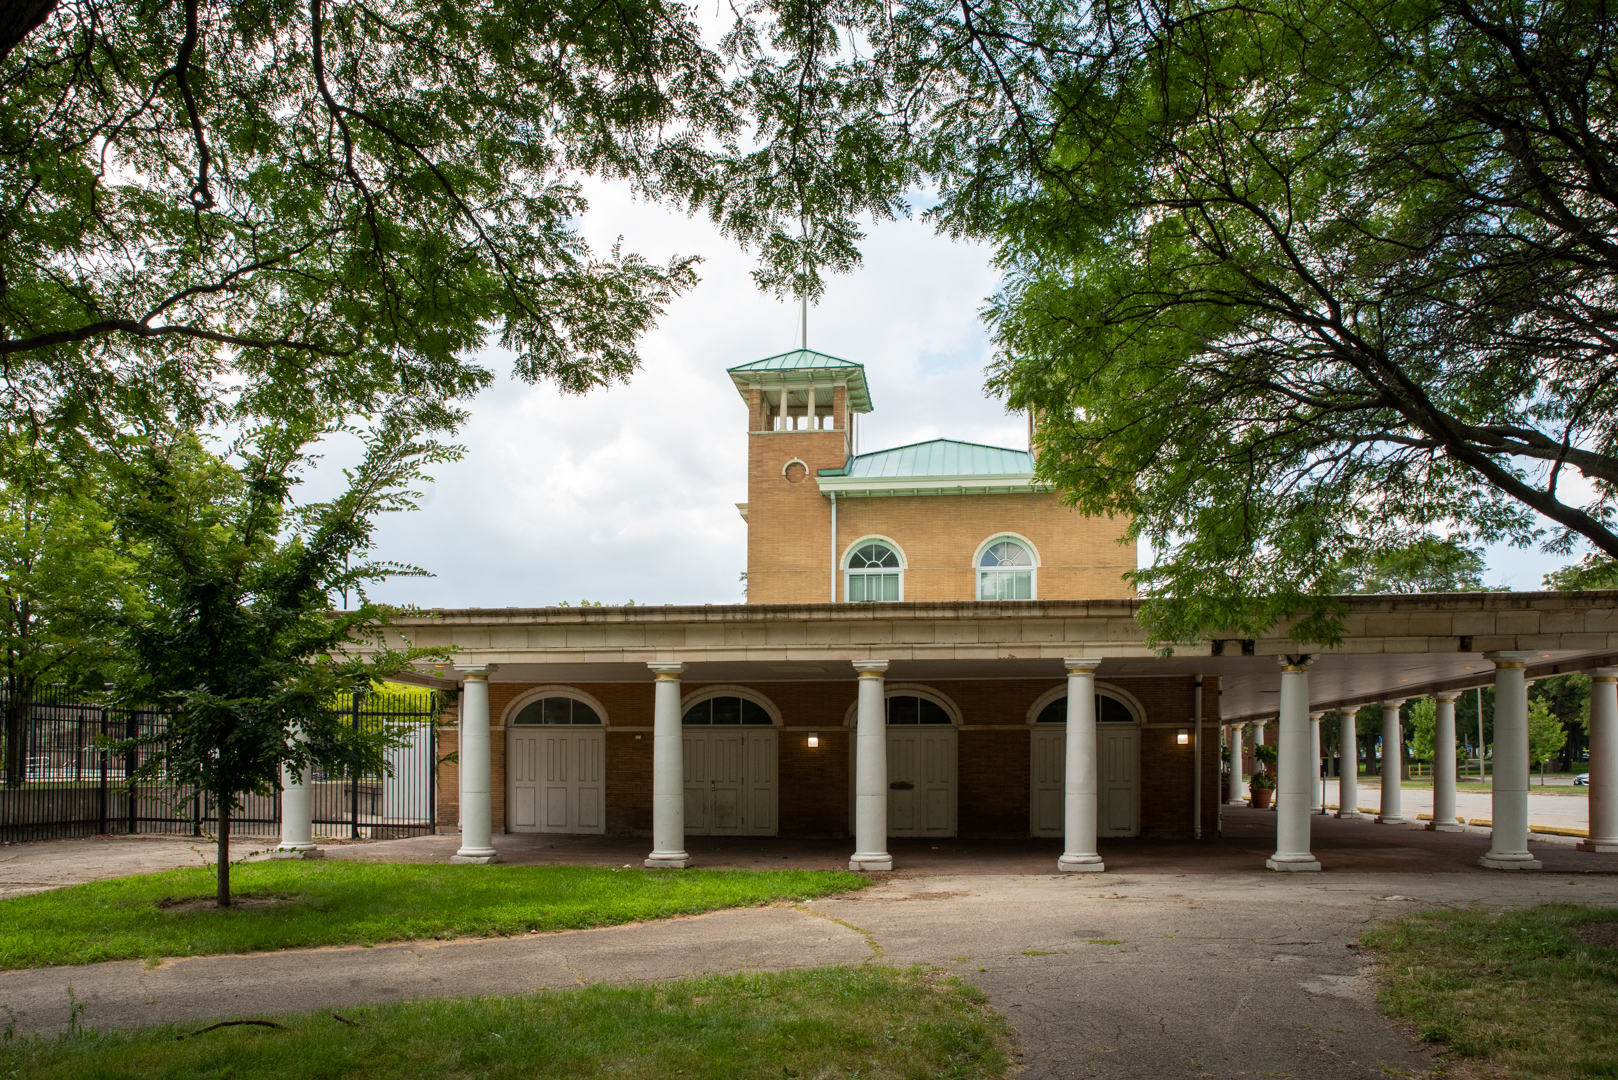 Image: The Washington Park field house, built in 1891, at the western entrance to the park. It is a multi-story brick building with columns and a covered walkway around it. Photo by EdVetté Wilson Jones.